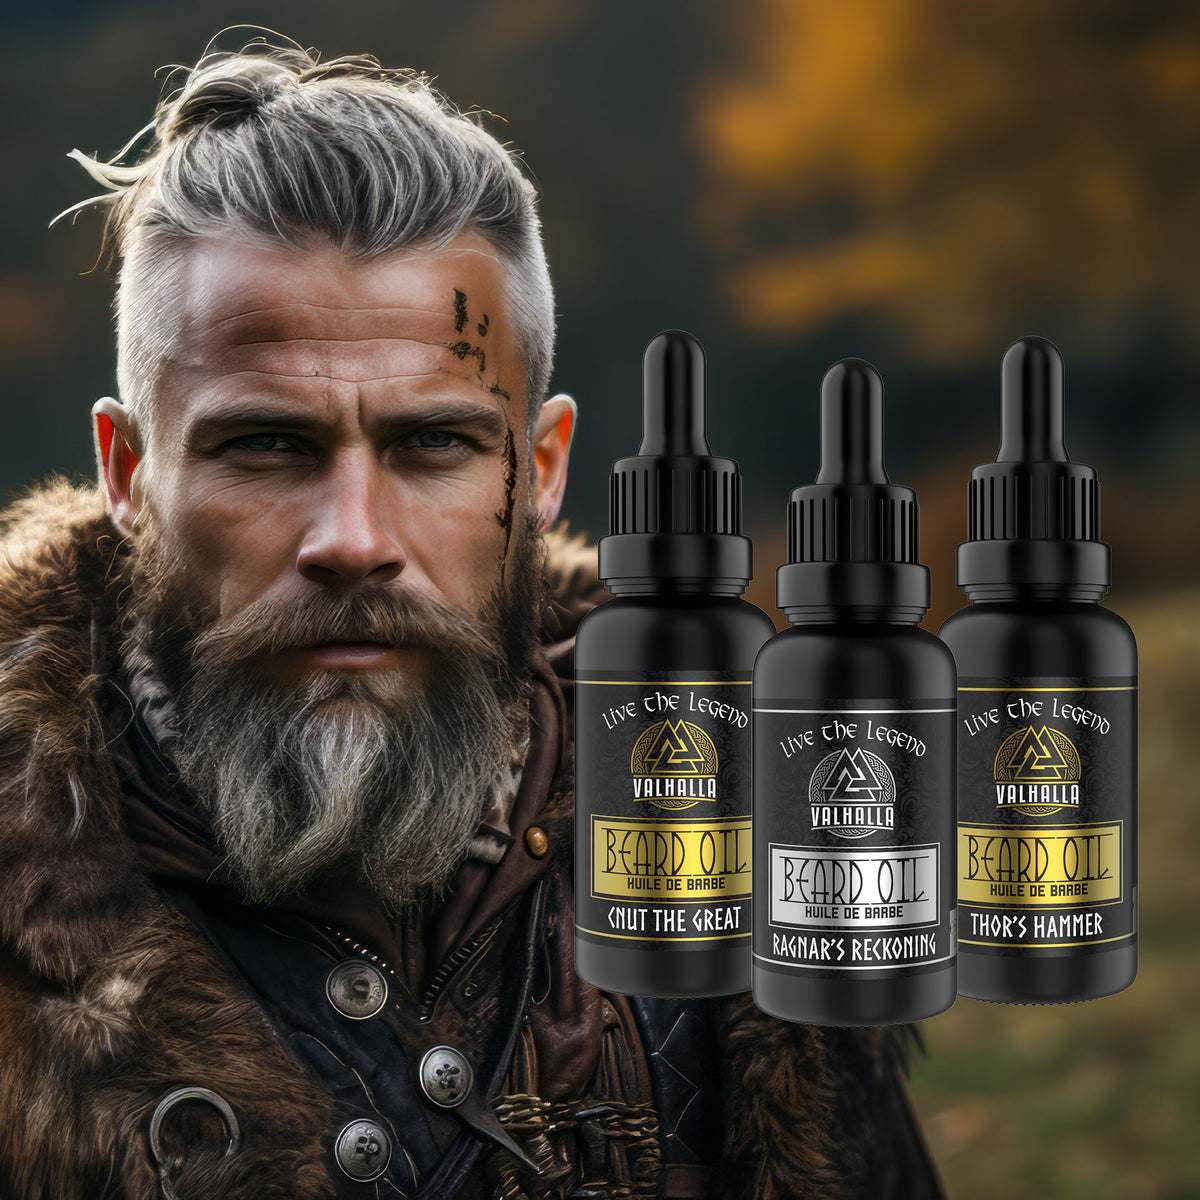 Attractive Modern Viking Man wearing viking clothing and looking into the camera. Has a nice beard and trendy hair cut. Valhalla Legend Beard Oils placed on the side of the image. 